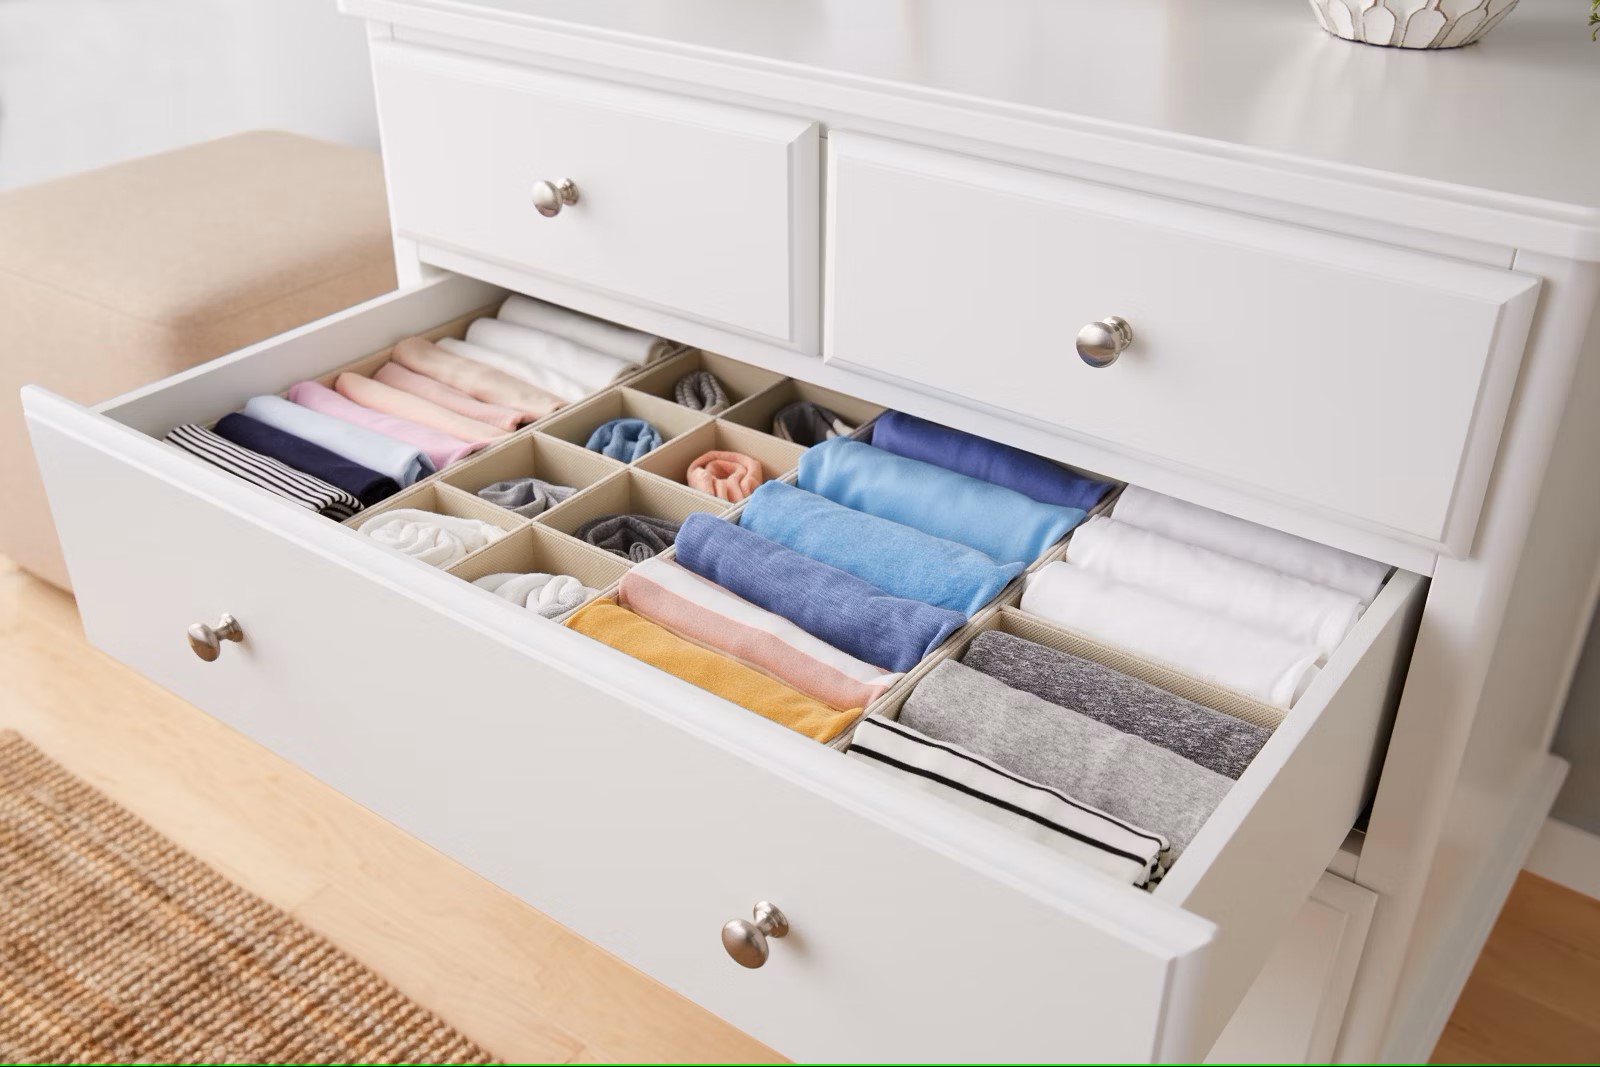 An Organizer's Thoughts and Ideas: Dresser Drawer Overhaul